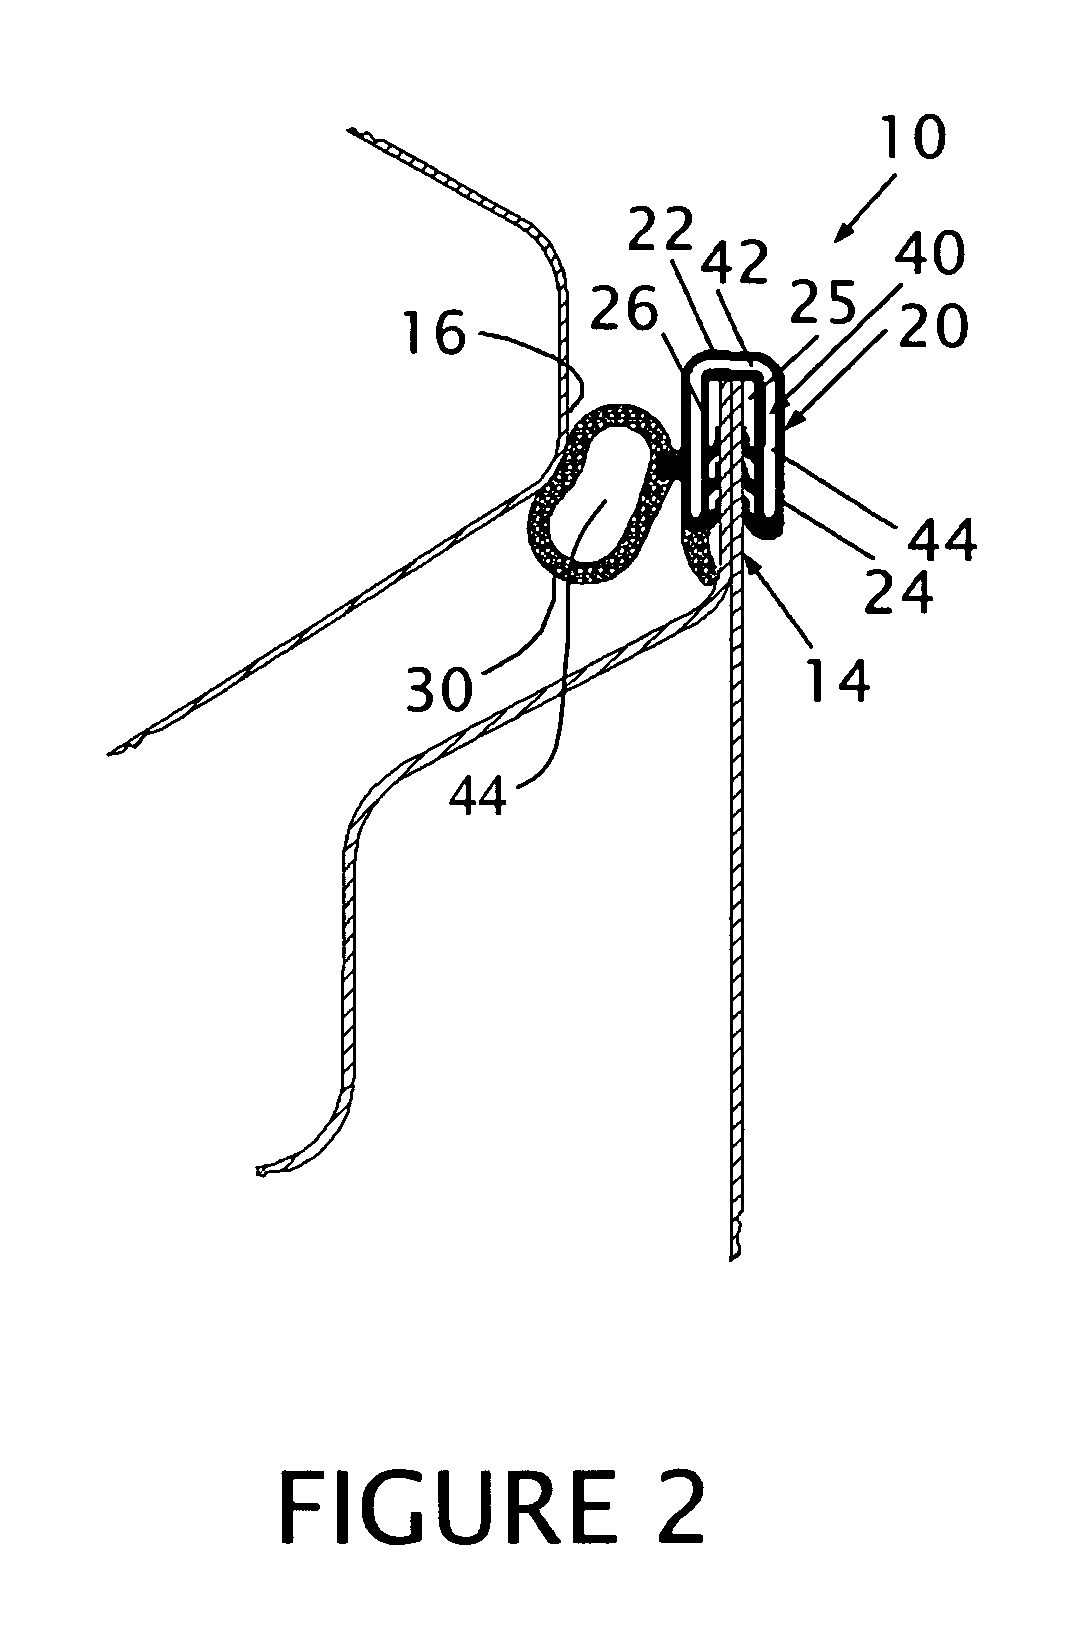 Flange engaging strip with a carrier for engaging a flange having a varying thickness along a longitudinal dimension